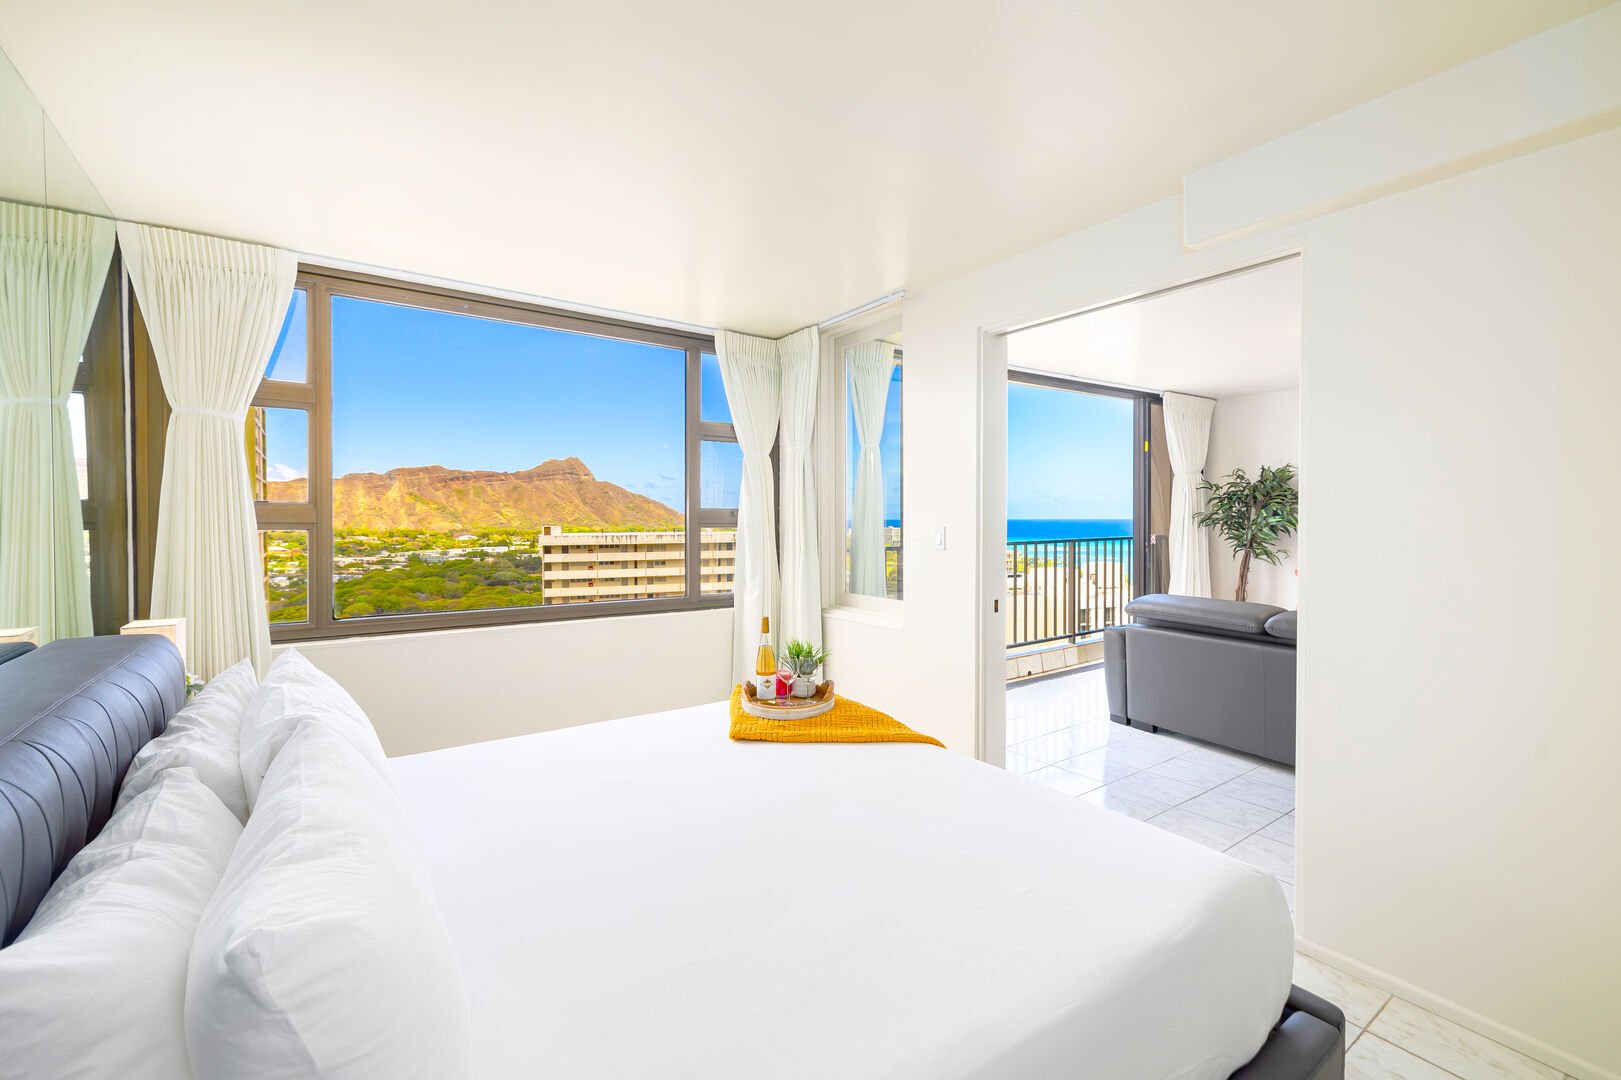 Relax in the bedroom with a king-size bed and beautiful ocean and diamond-head views. It also has a sliding door that separates from the living room for your privacy.